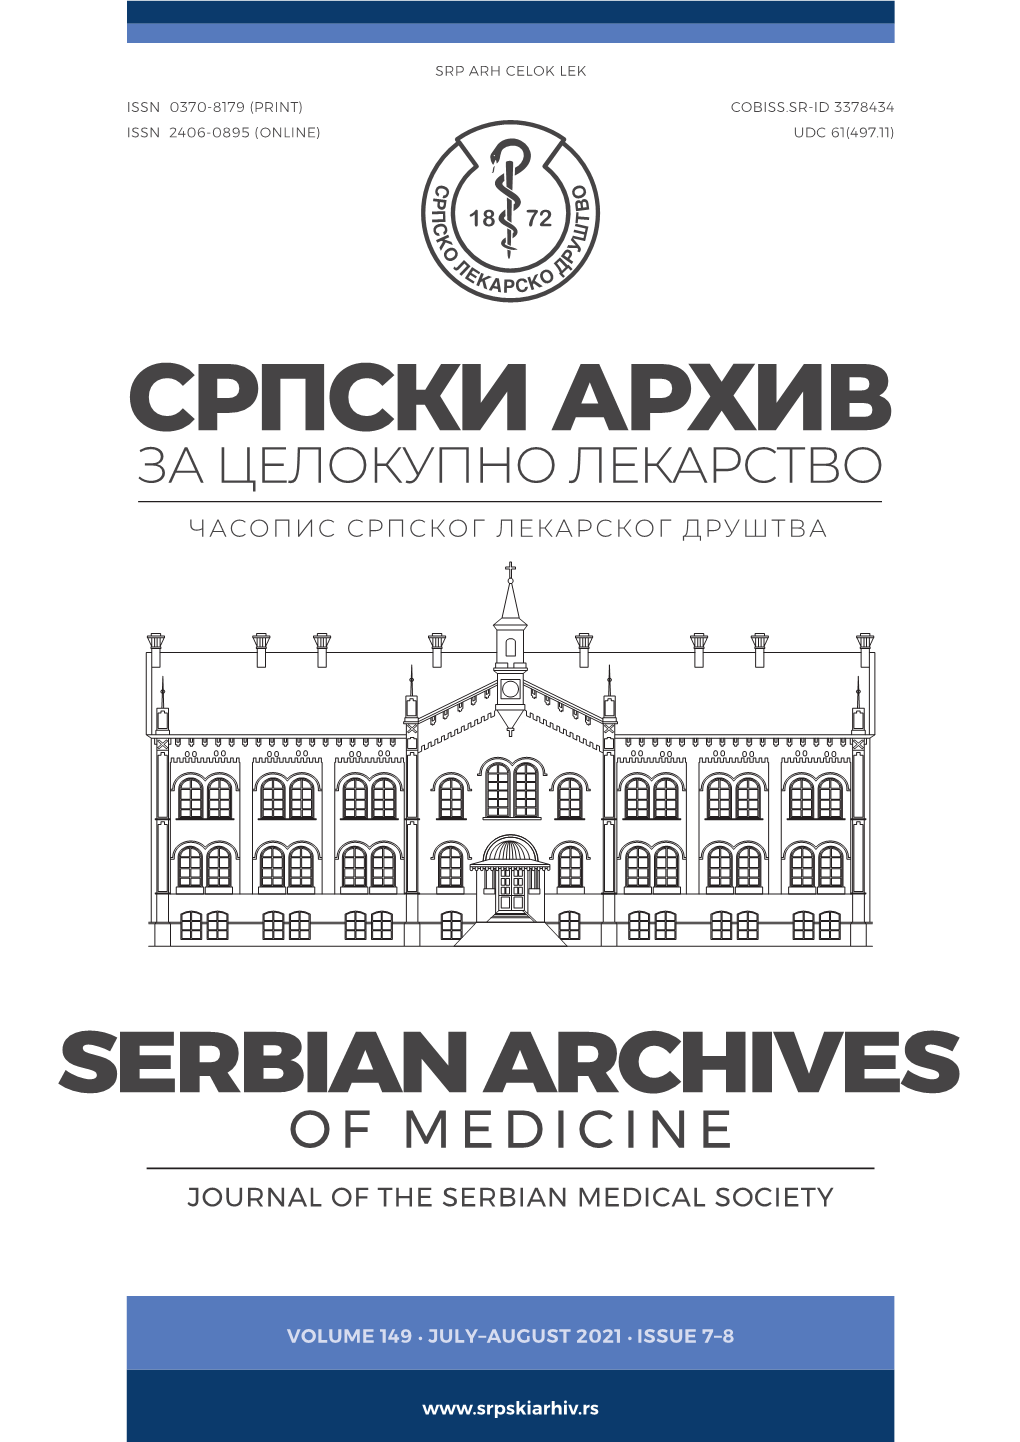 Serbian Archives